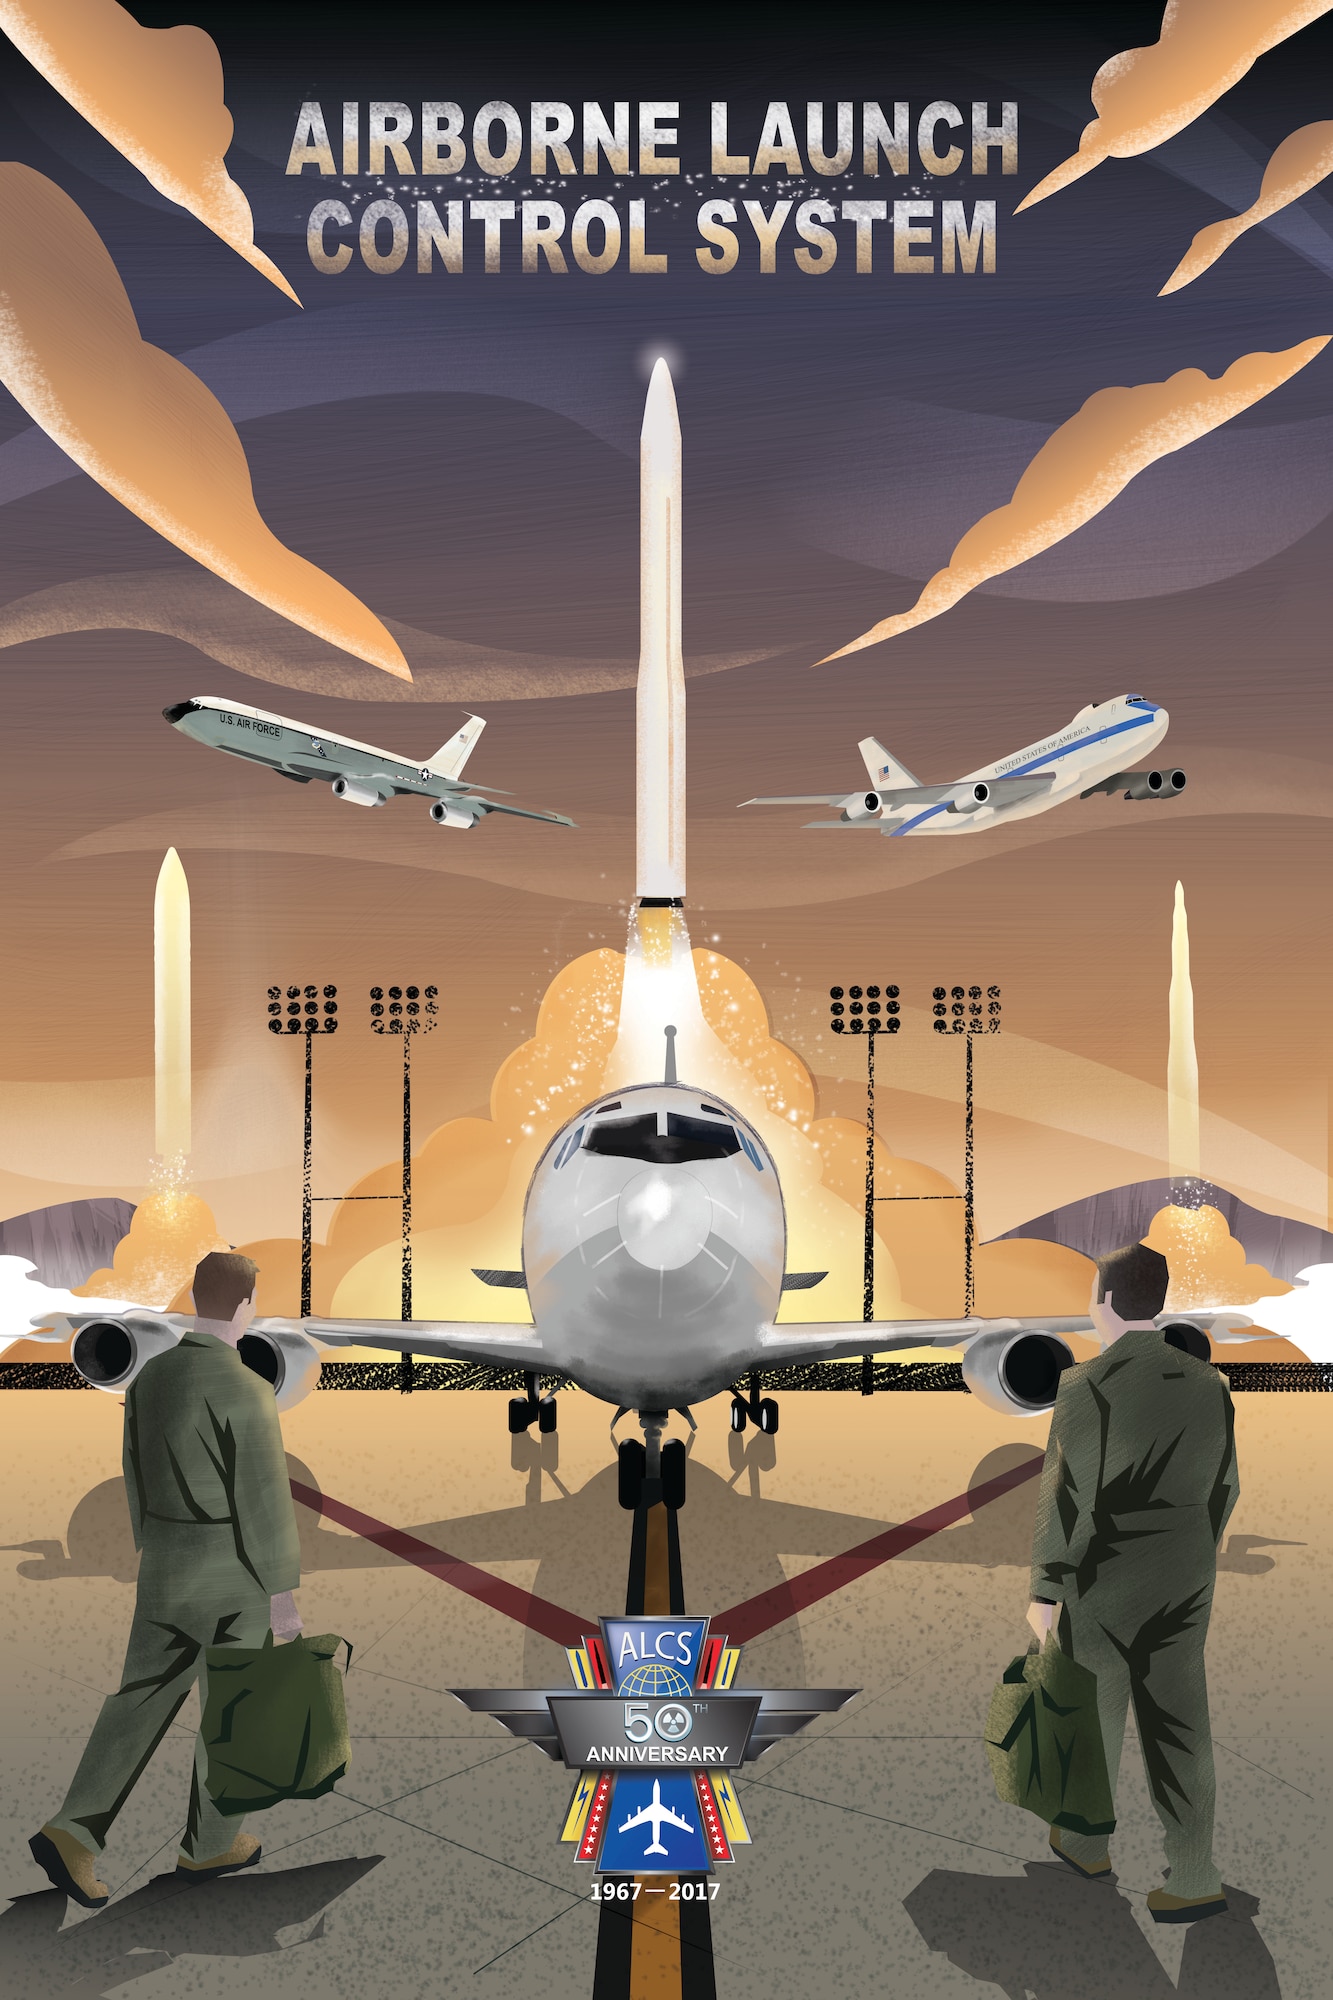 A poster commemorates the 50th anniversary of for the Airborne Launch Control System. Airborne missileers have patrolled the skies in four separate EC-135 variants as well as the E-4B and E-6B aircraft. Airborne missileers have the capability to remotely launch ballistic missiles carrying nuclear warheads. (U.S. Air Force graphic by Josh Plueger)